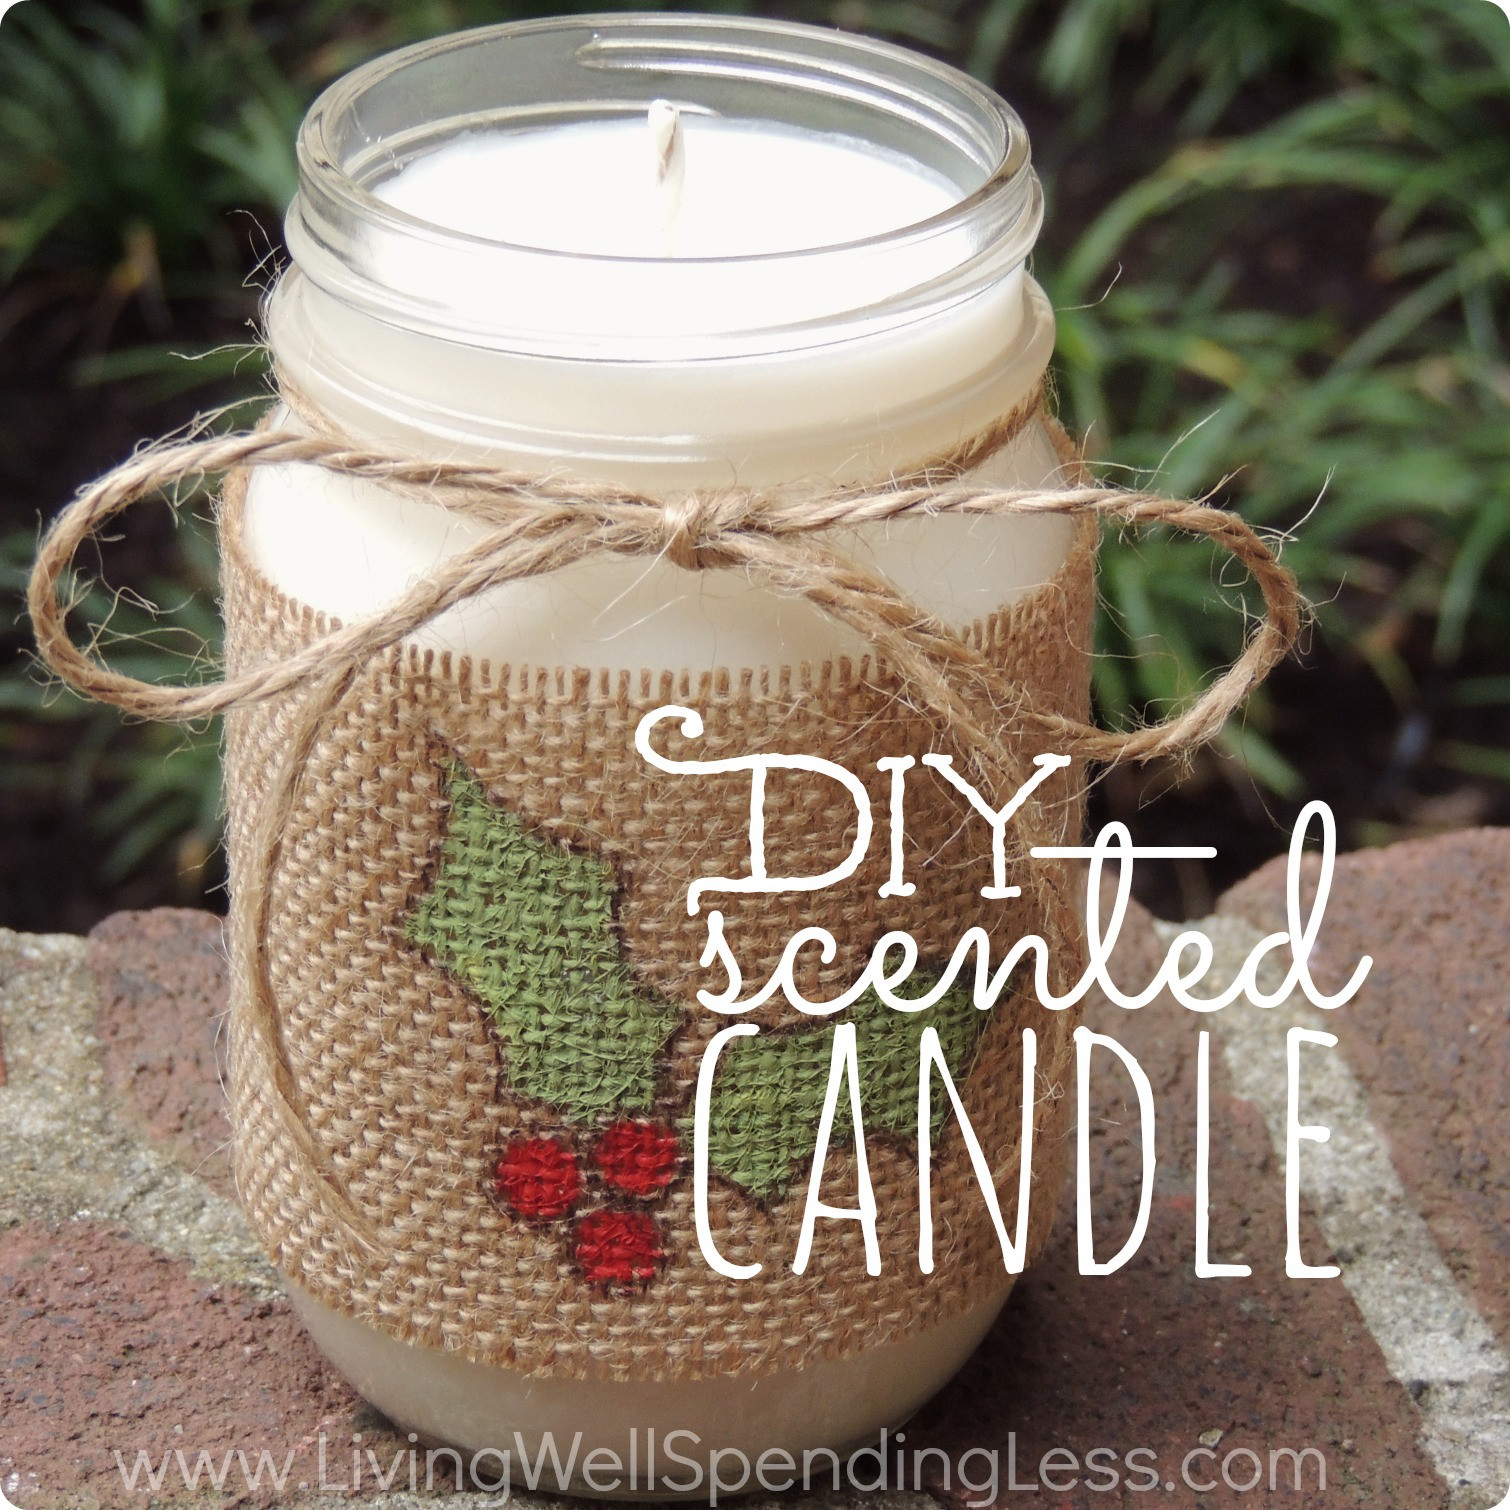 DIY Candle Gift
 DIY Scented Candle Handmade Gifts Ideas